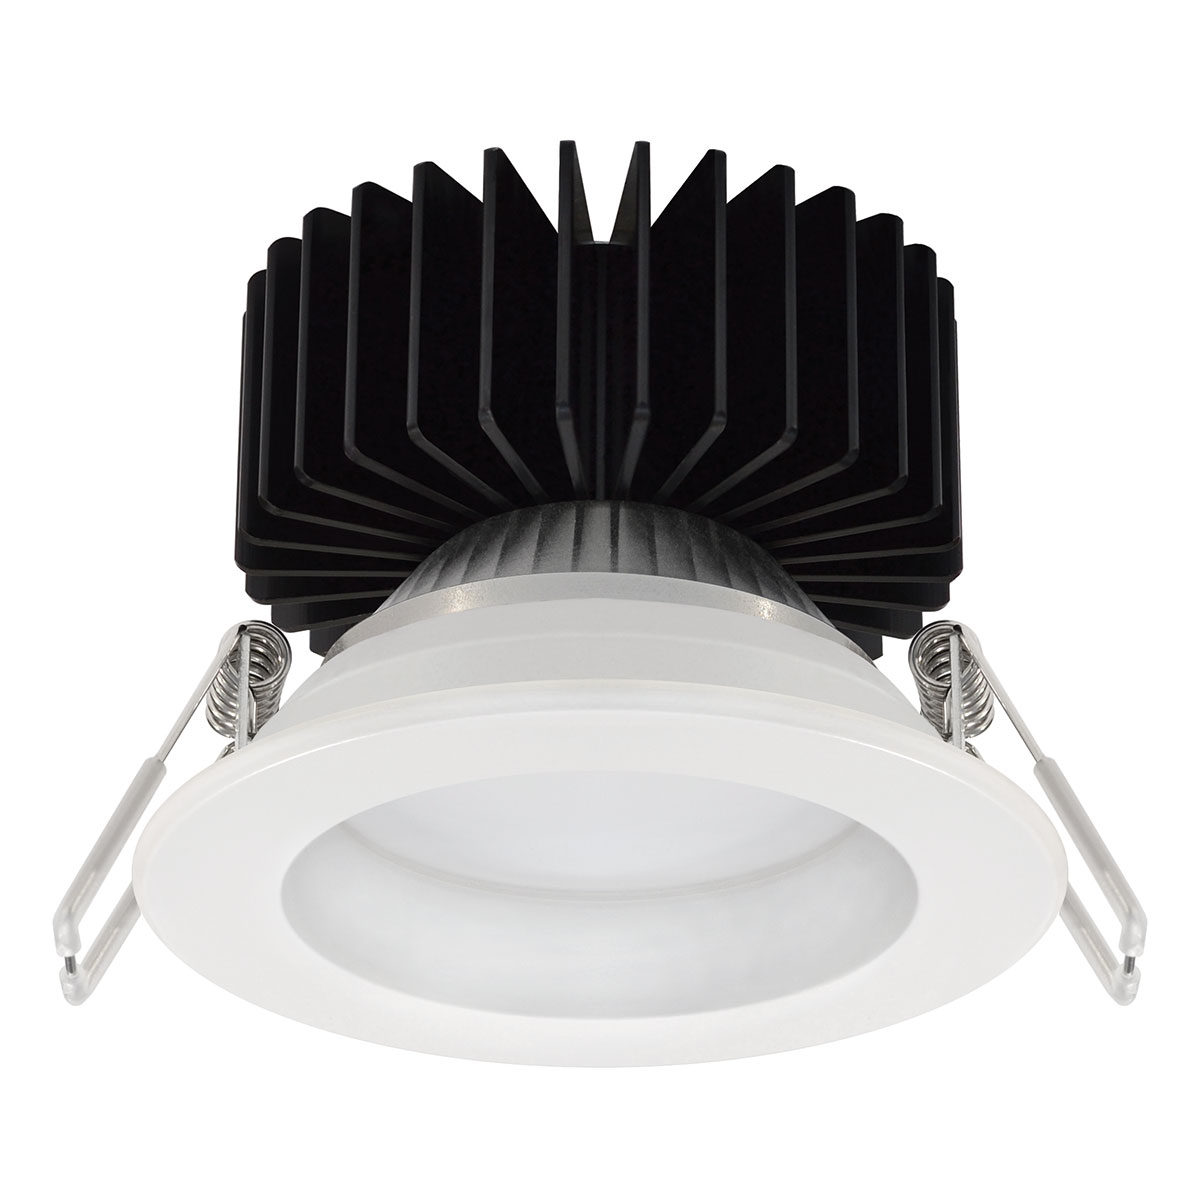 Kopa 18W Fixed Round Recessed LED Downlight IP65 80 Degree Diffused Black Trim